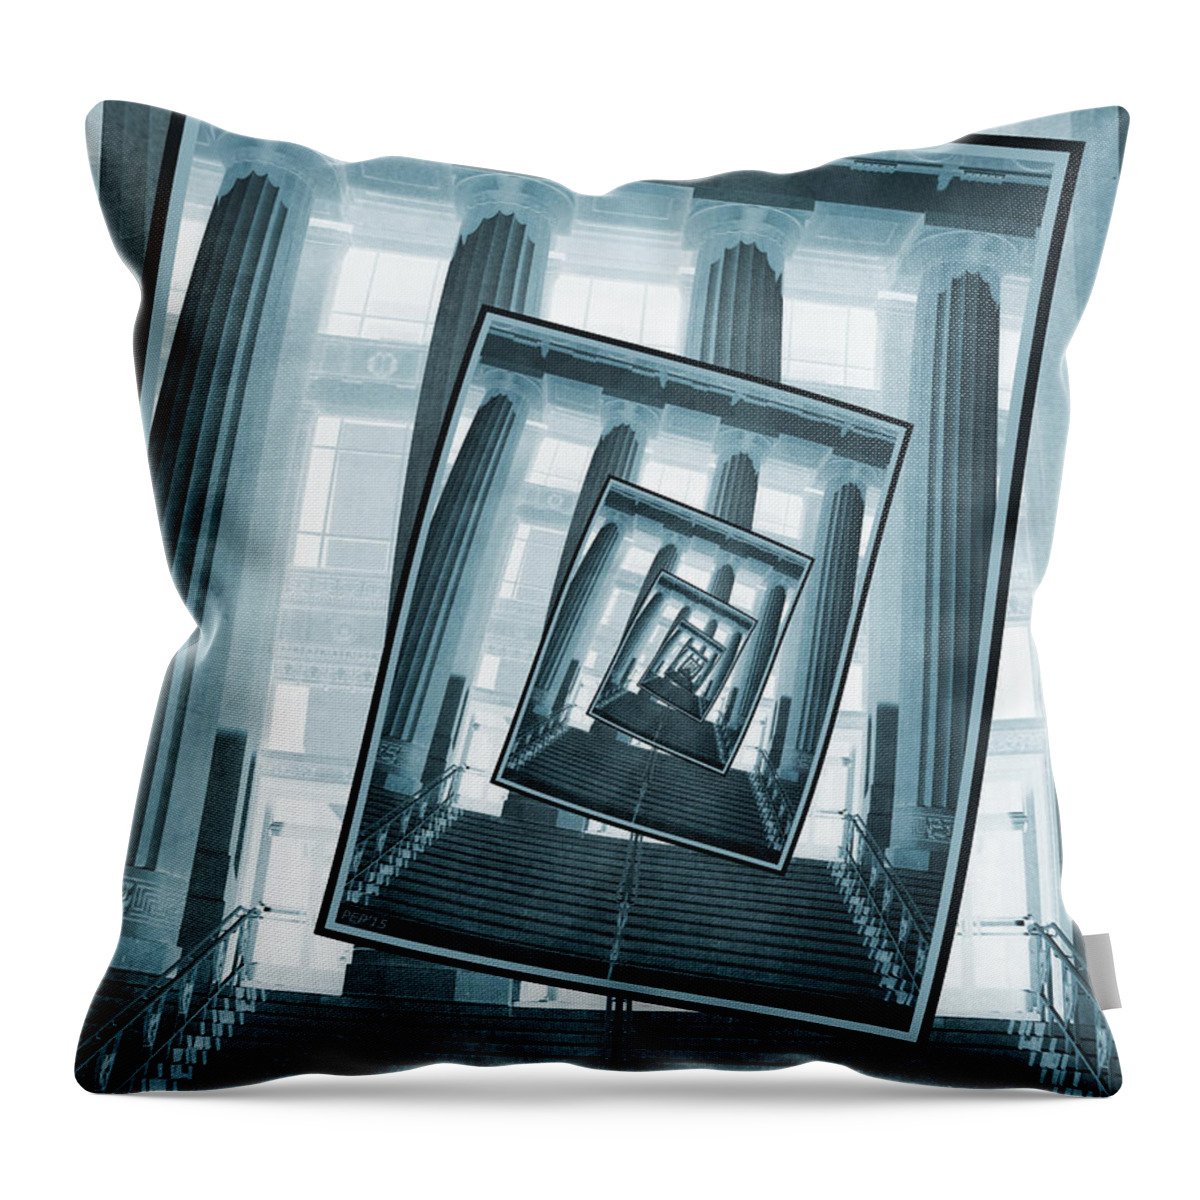 Photography Throw Pillow featuring the photograph Stairs And Pillars by Phil Perkins